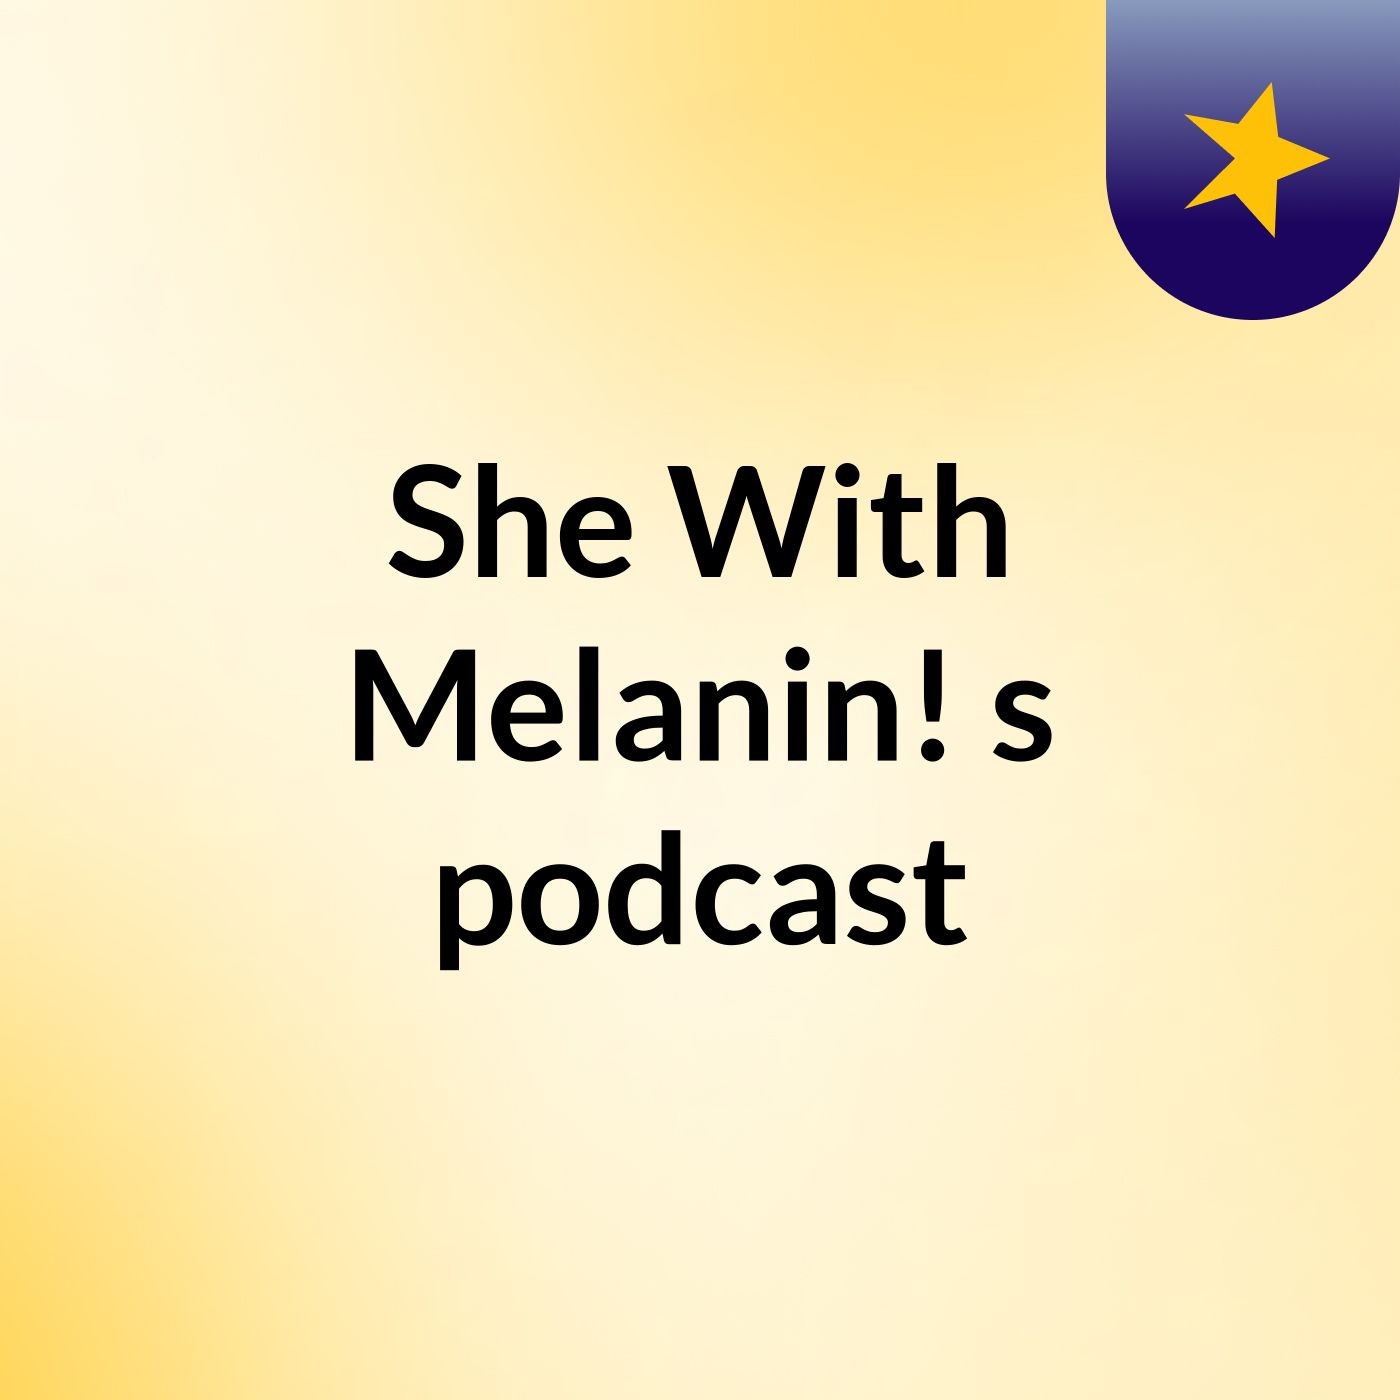 She With Melanin!'s podcast